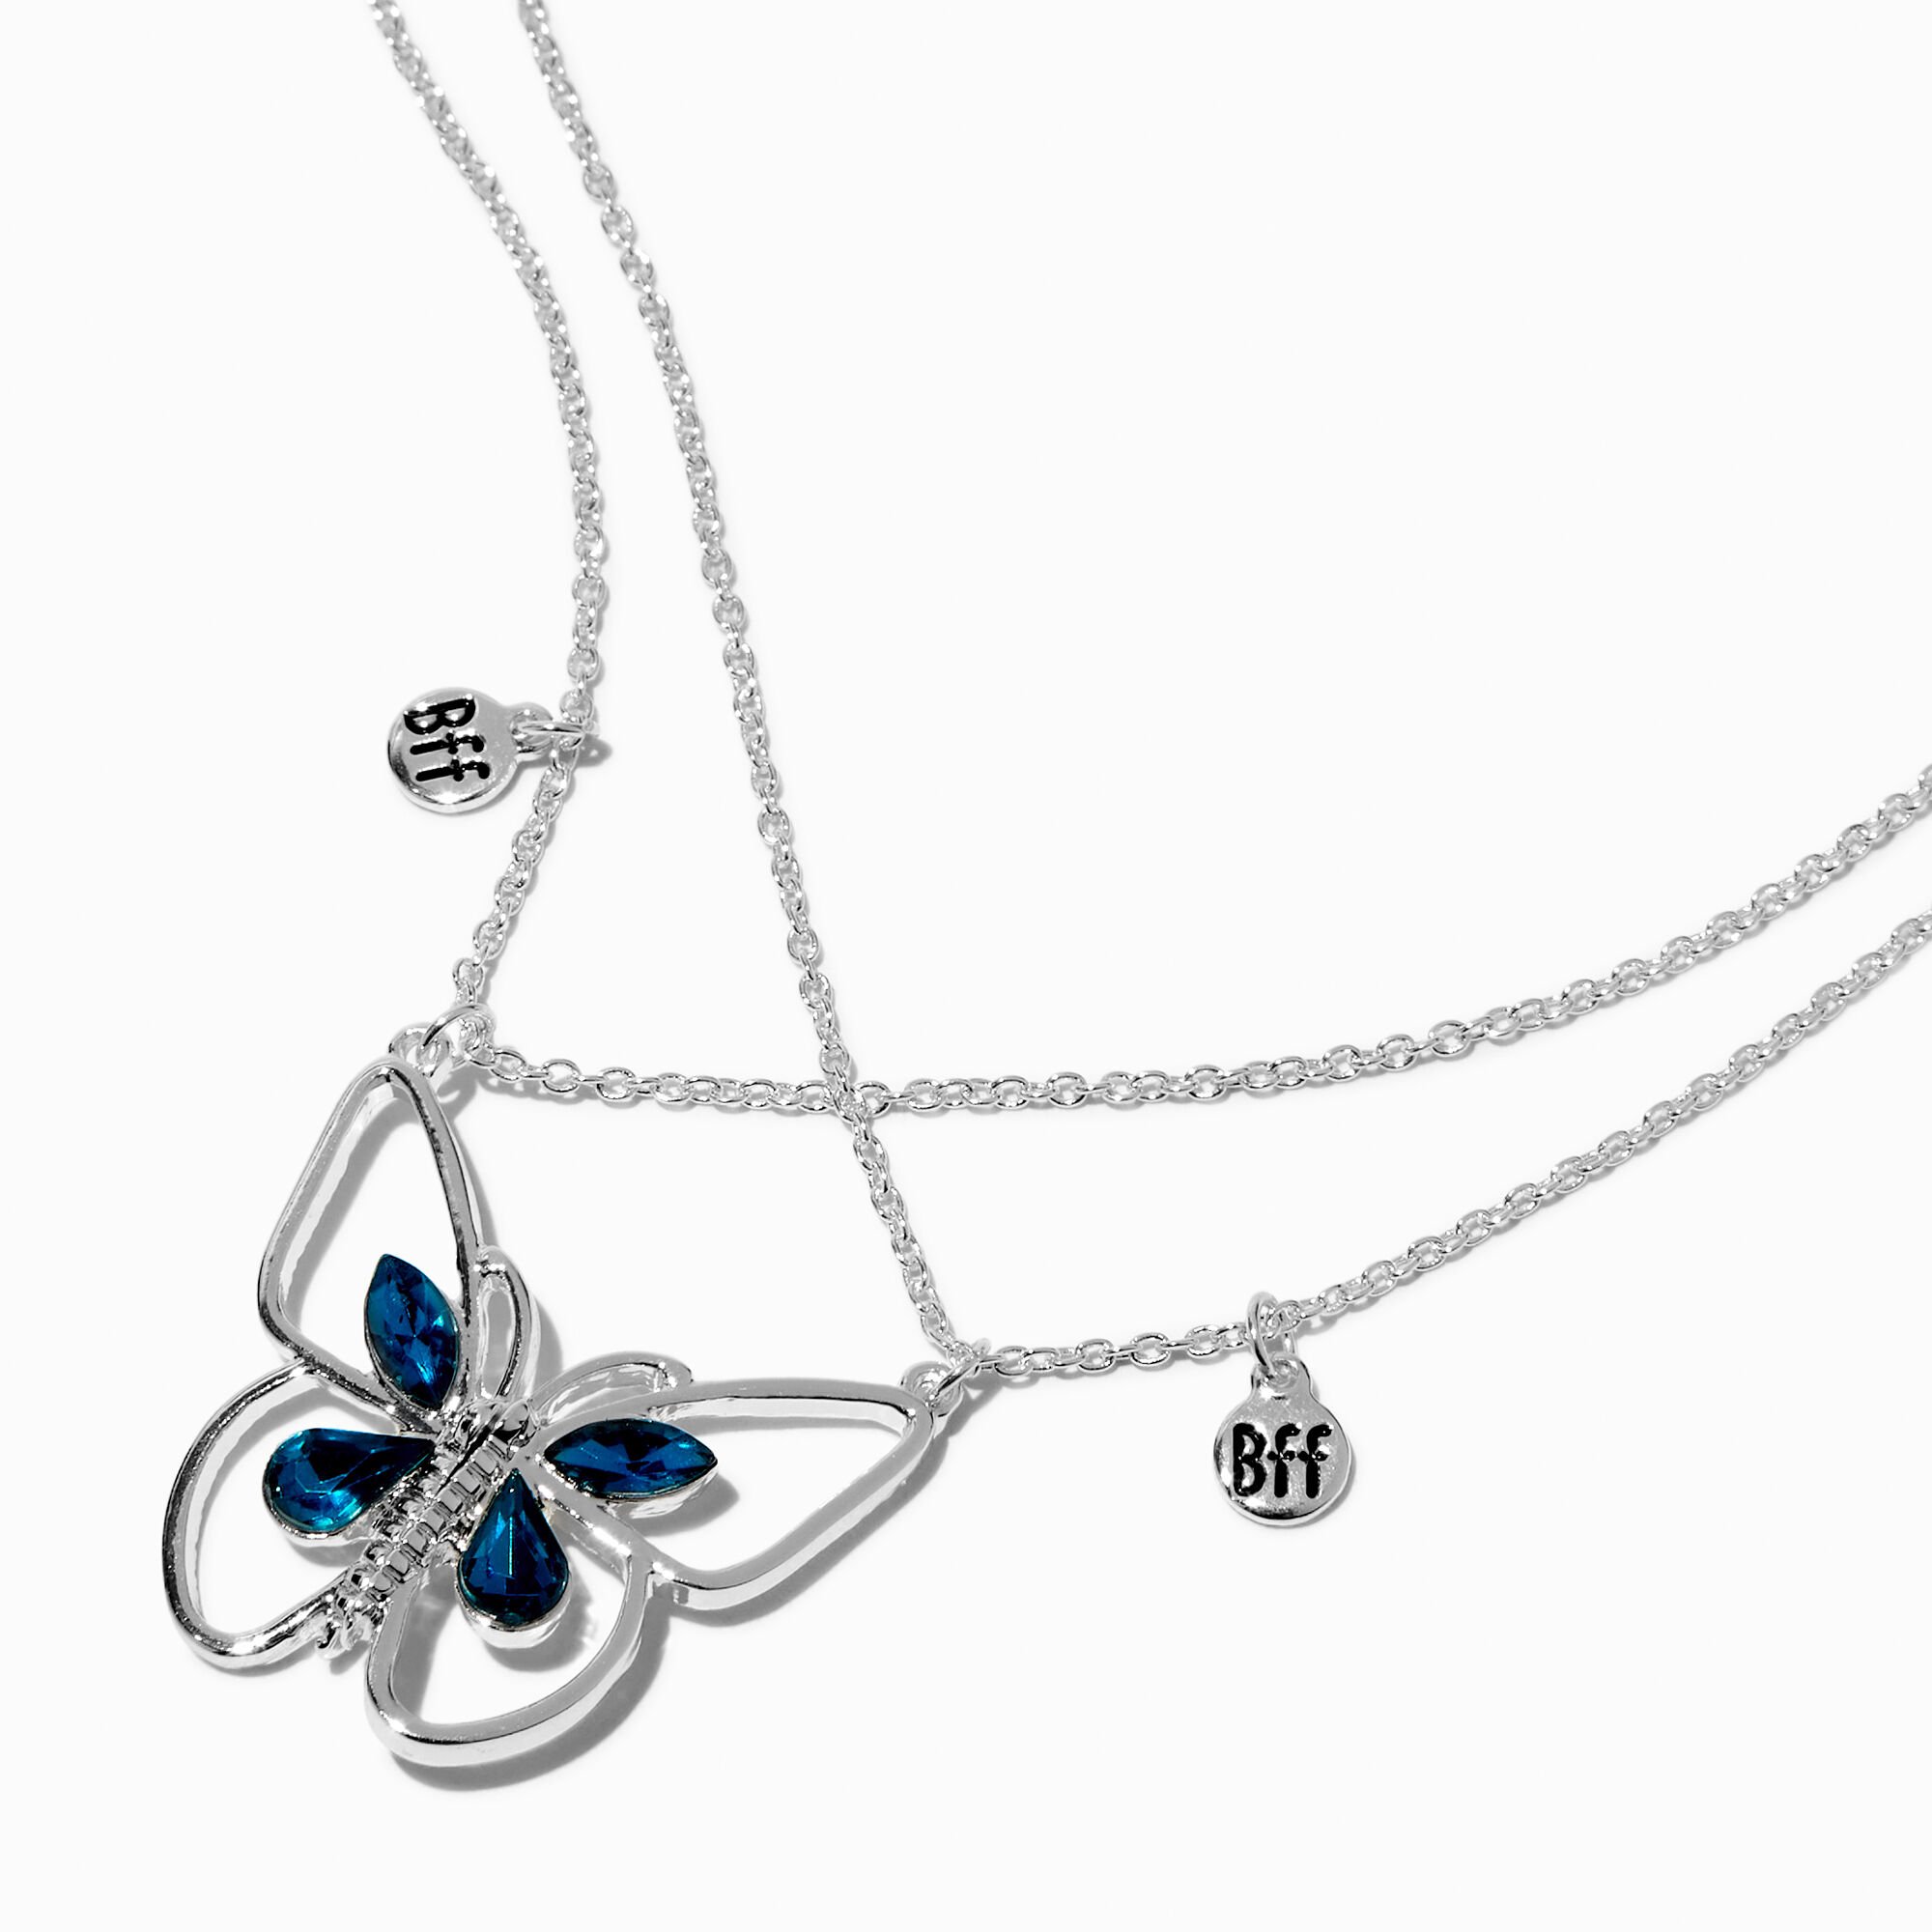 View Claires Best Friends Split Butterfly Pendant Necklace Set 2 Pack Turquoise information